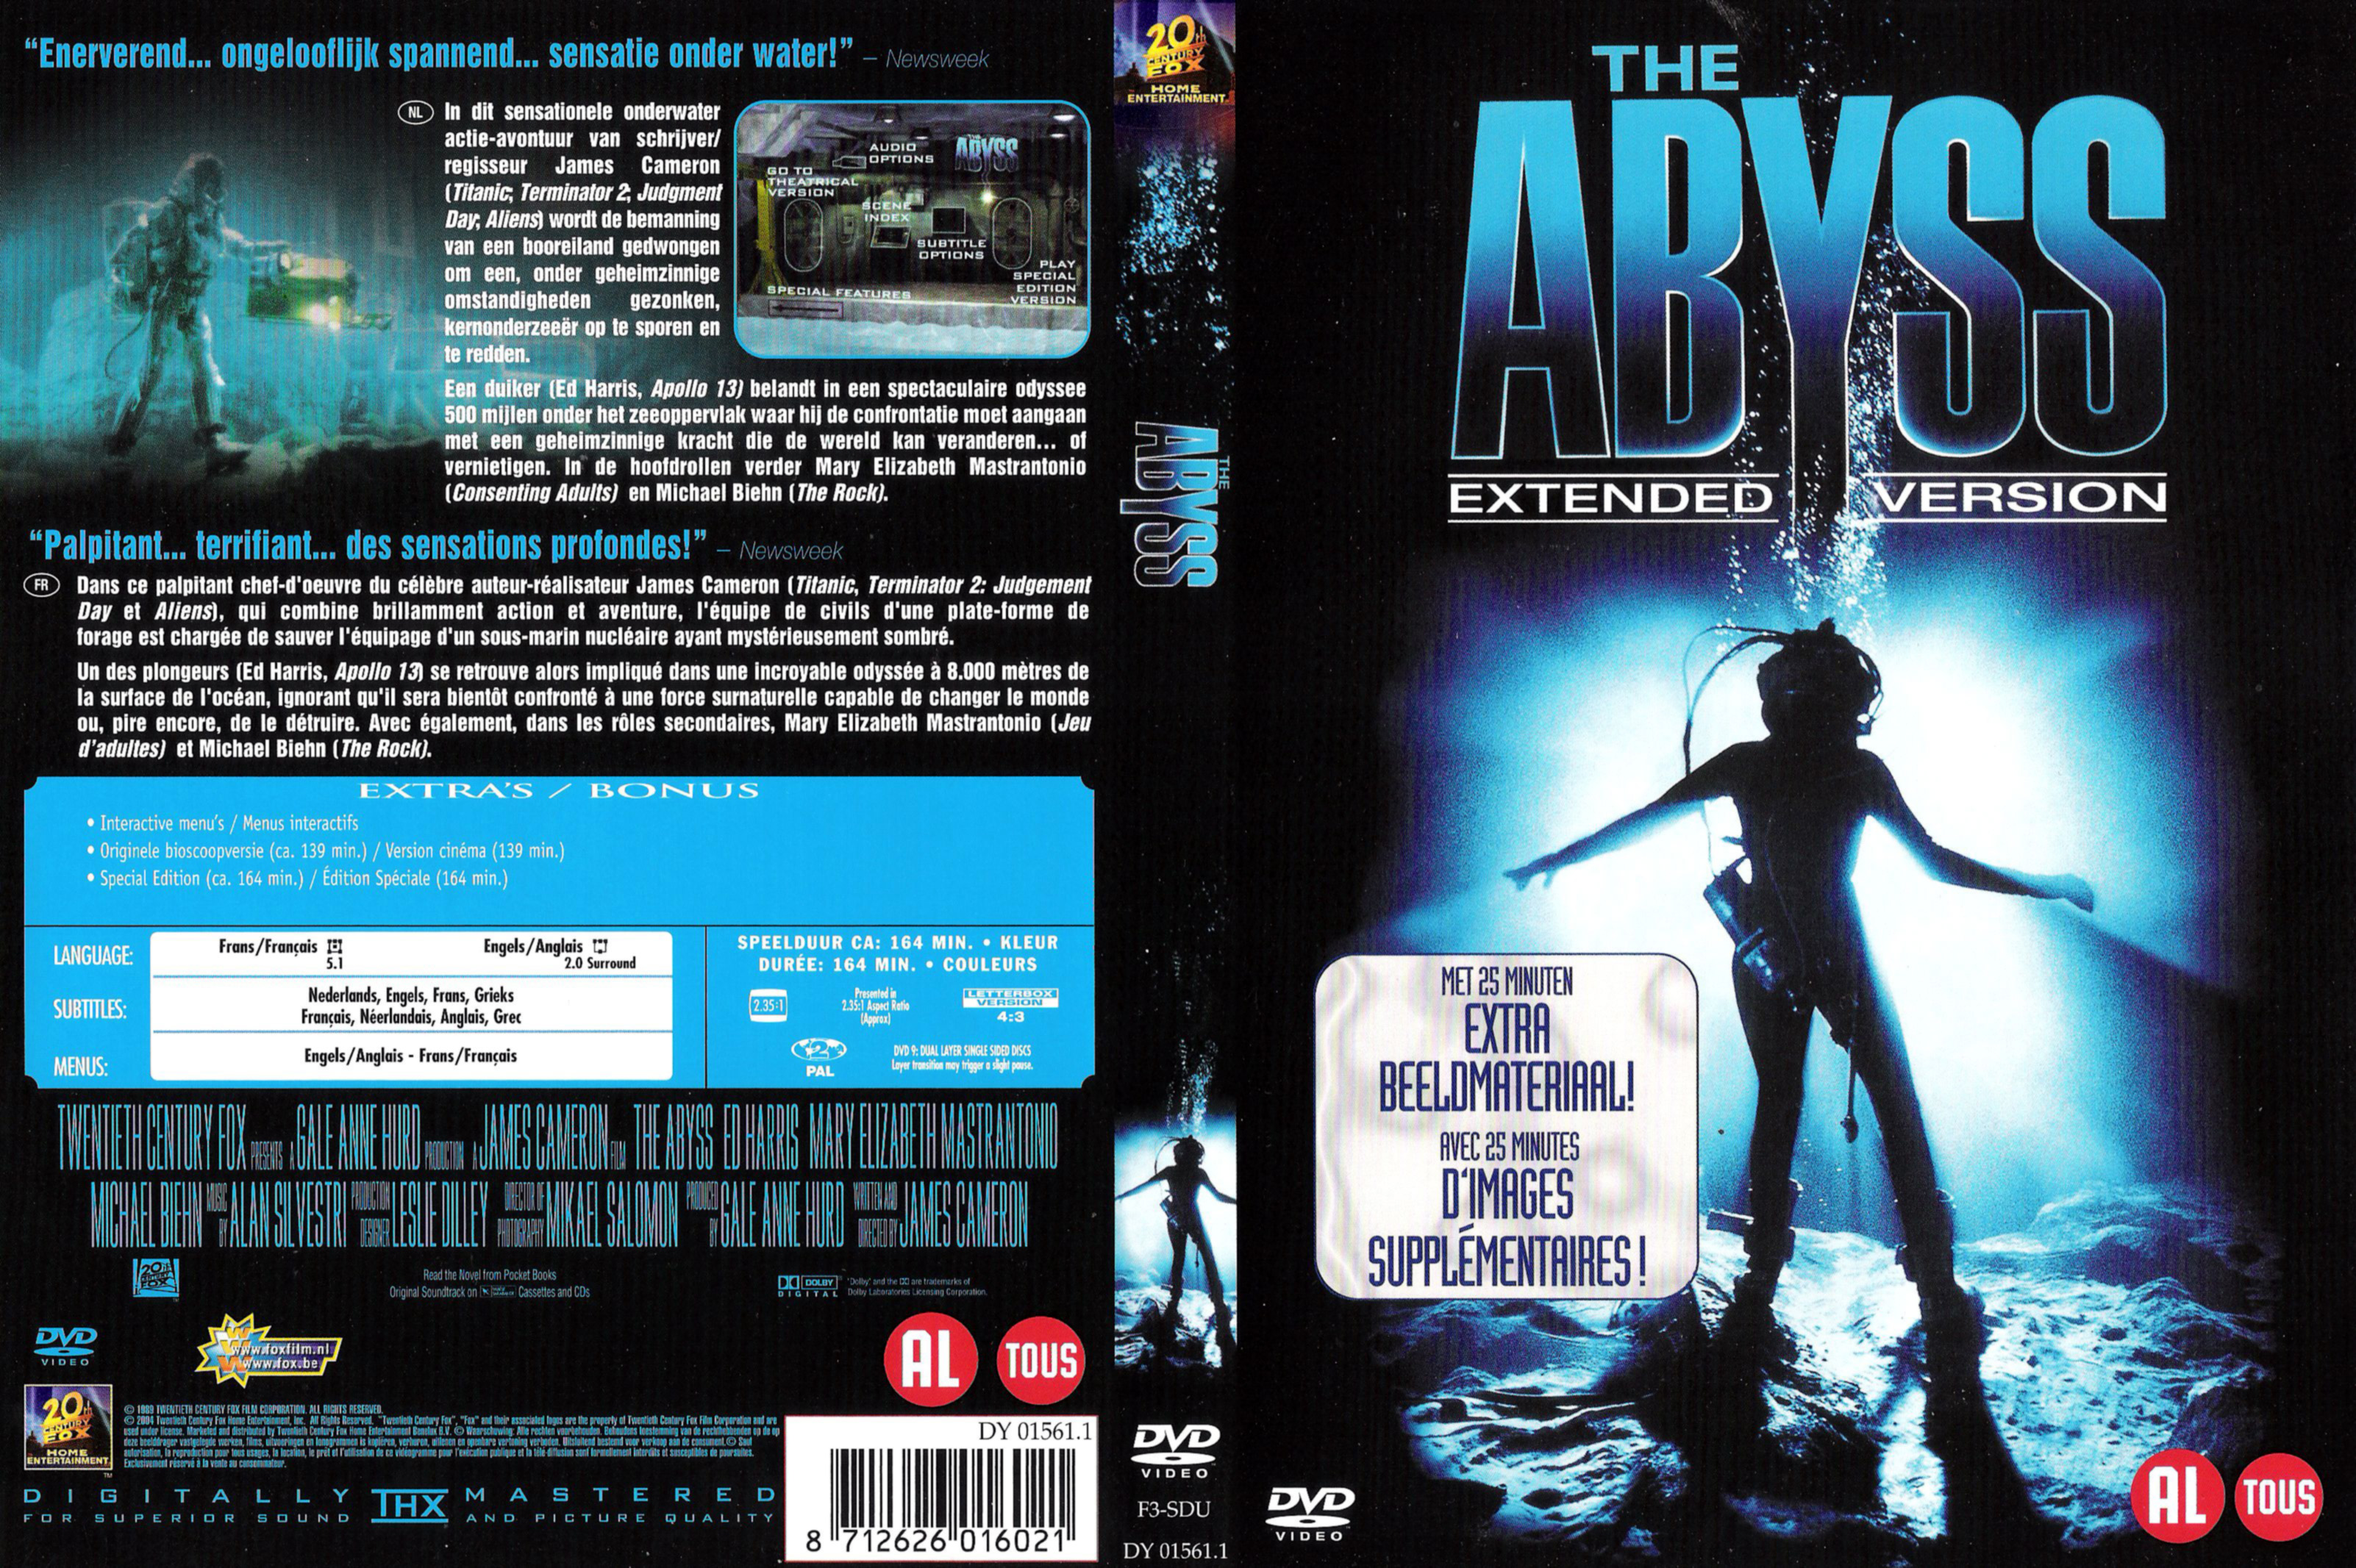 Jaquette DVD Abyss v3